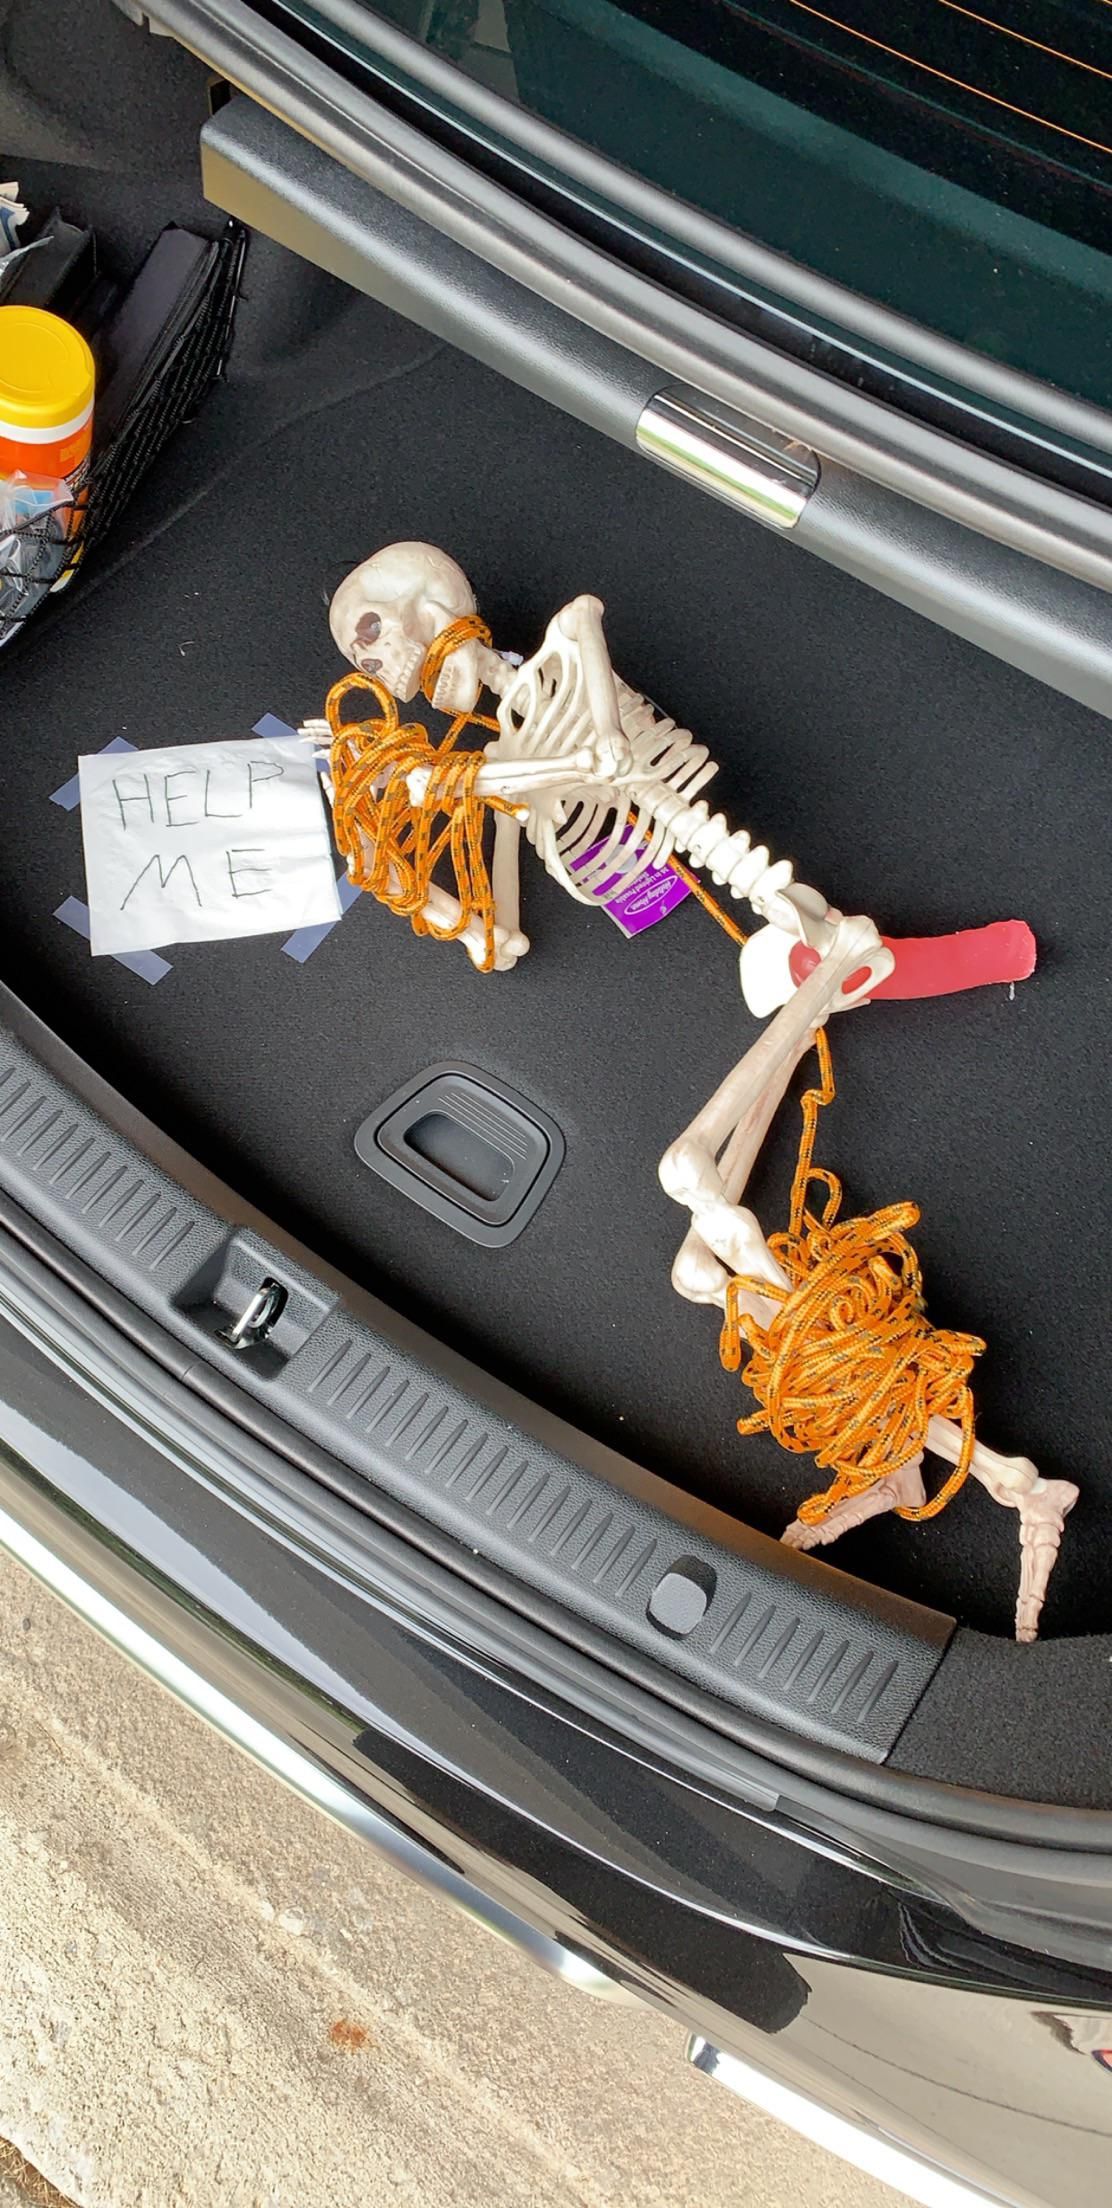 My brother and I have been hiding a decorative skeleton on each other for months. Today, he went for a run and left his car here. So naturally...